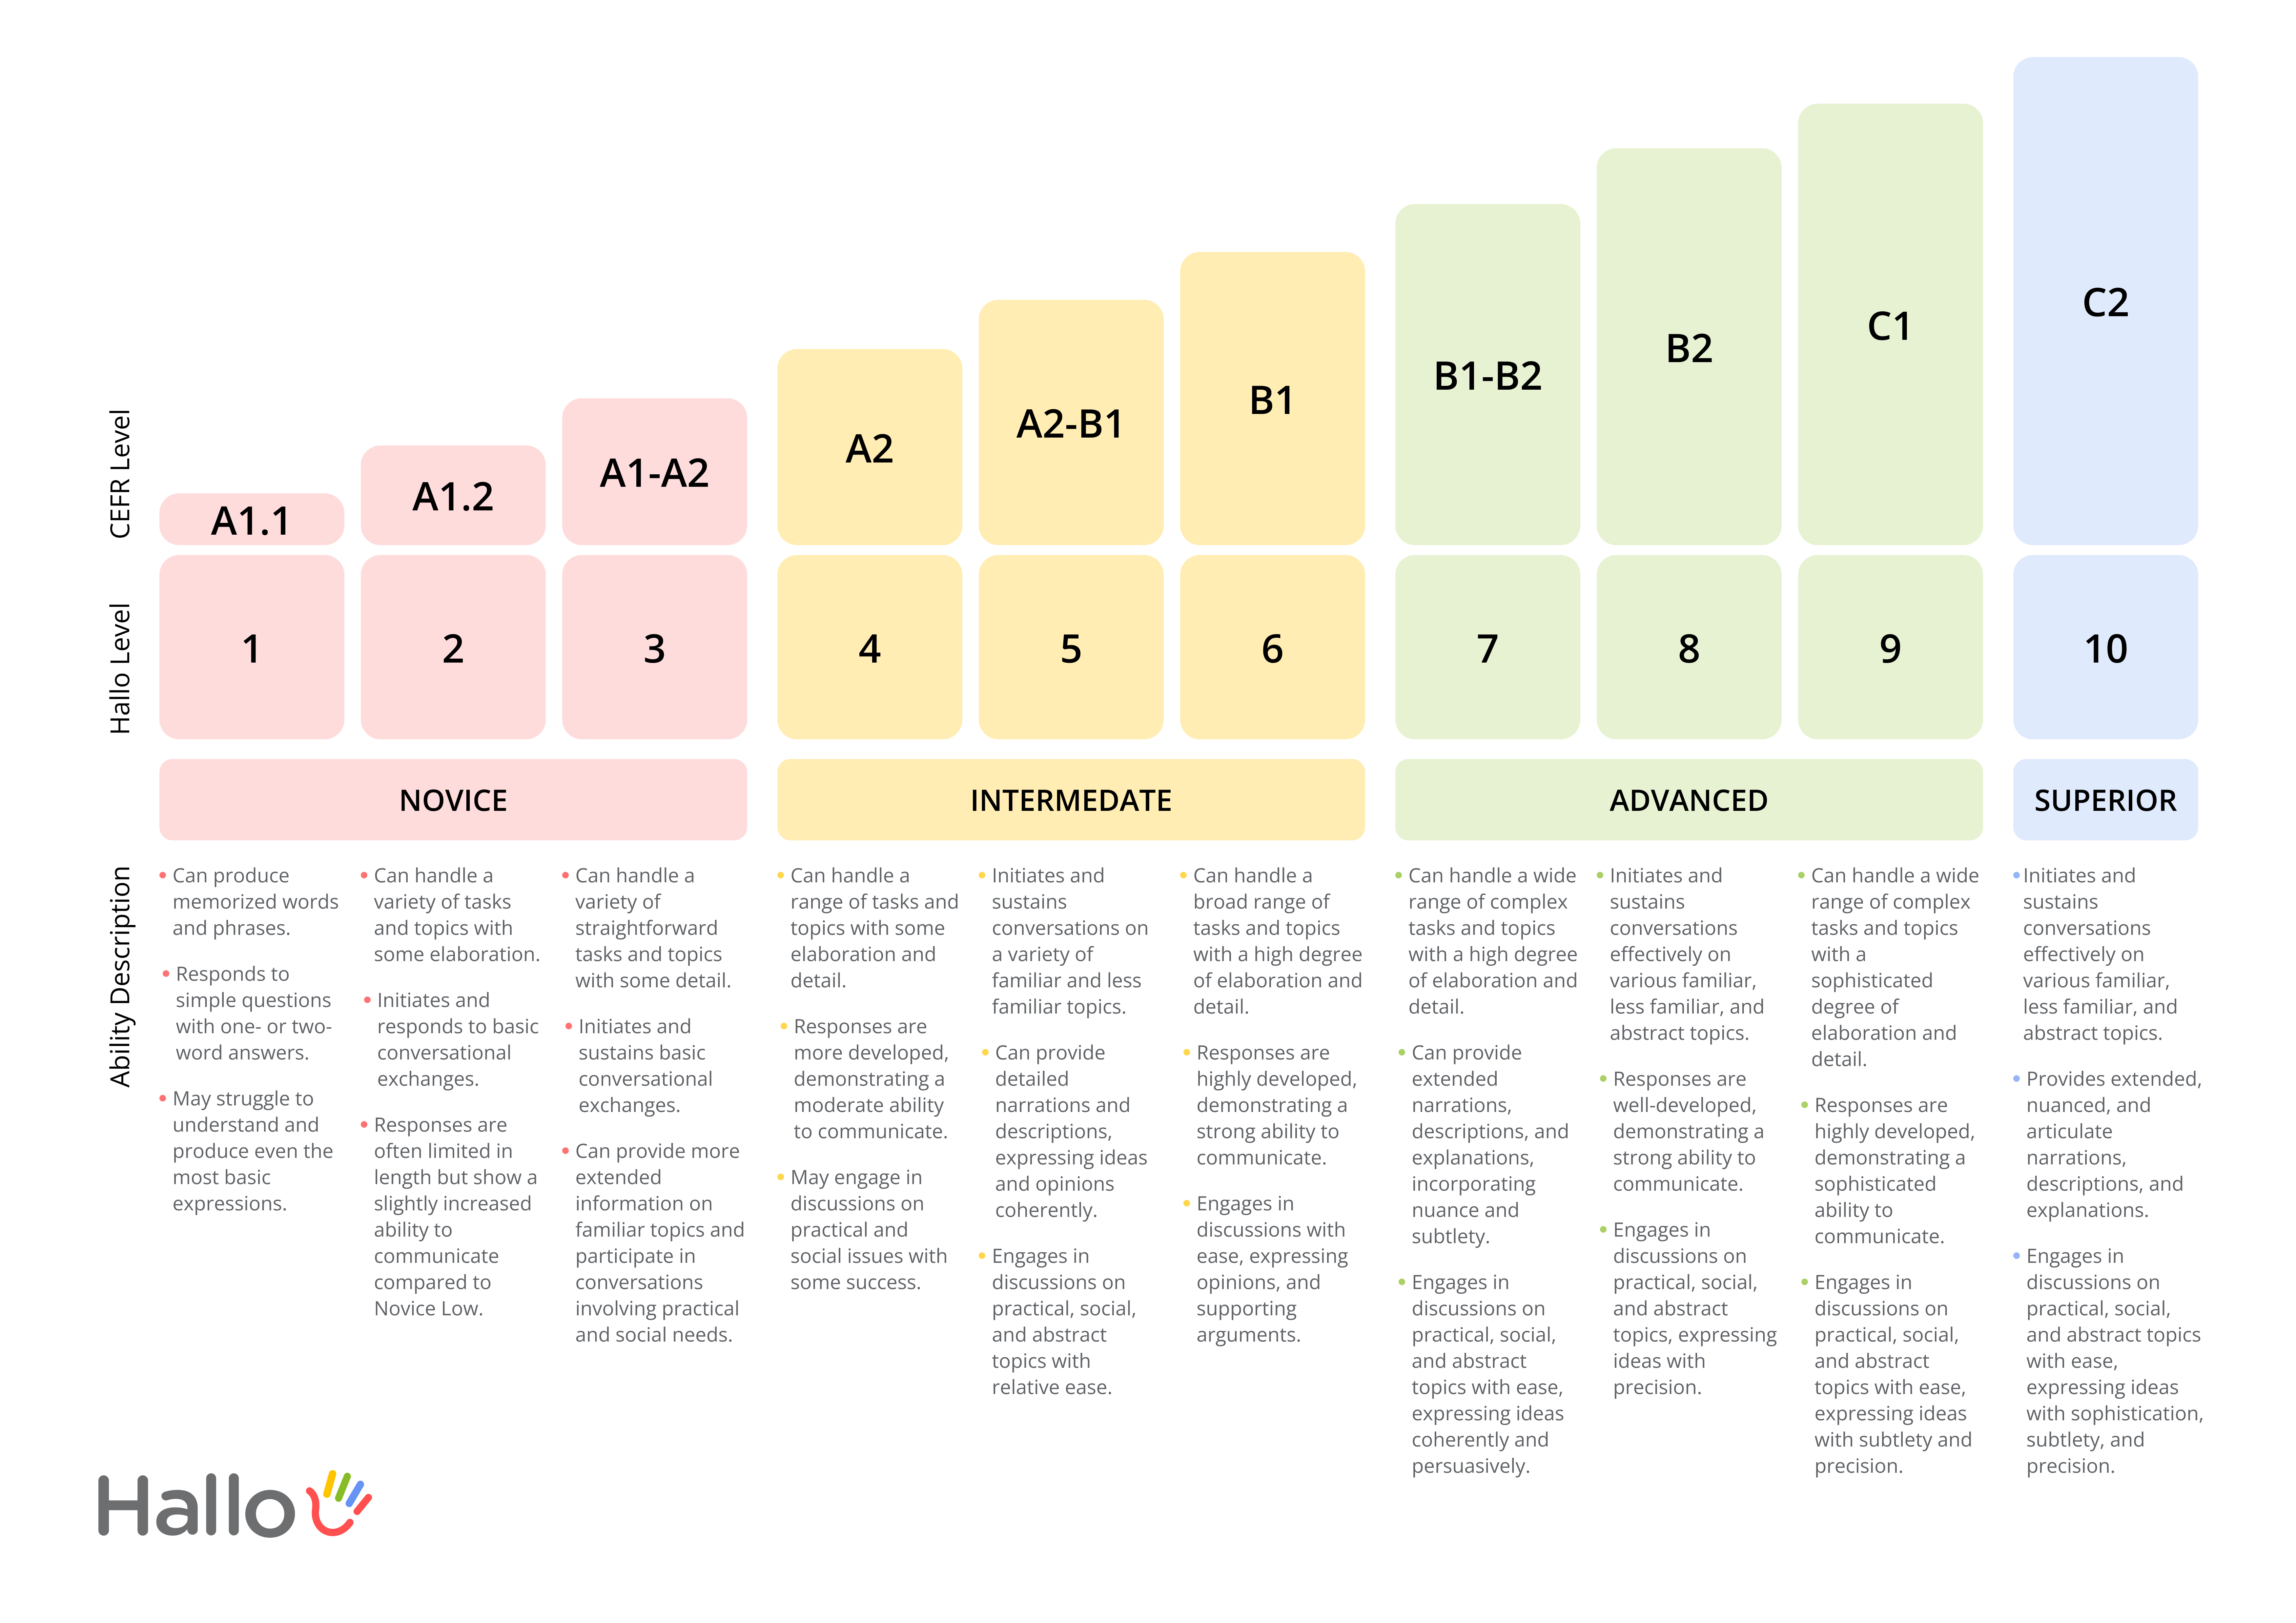 To show Hallo's language assessment score scale comparing CEFR and ACTFL